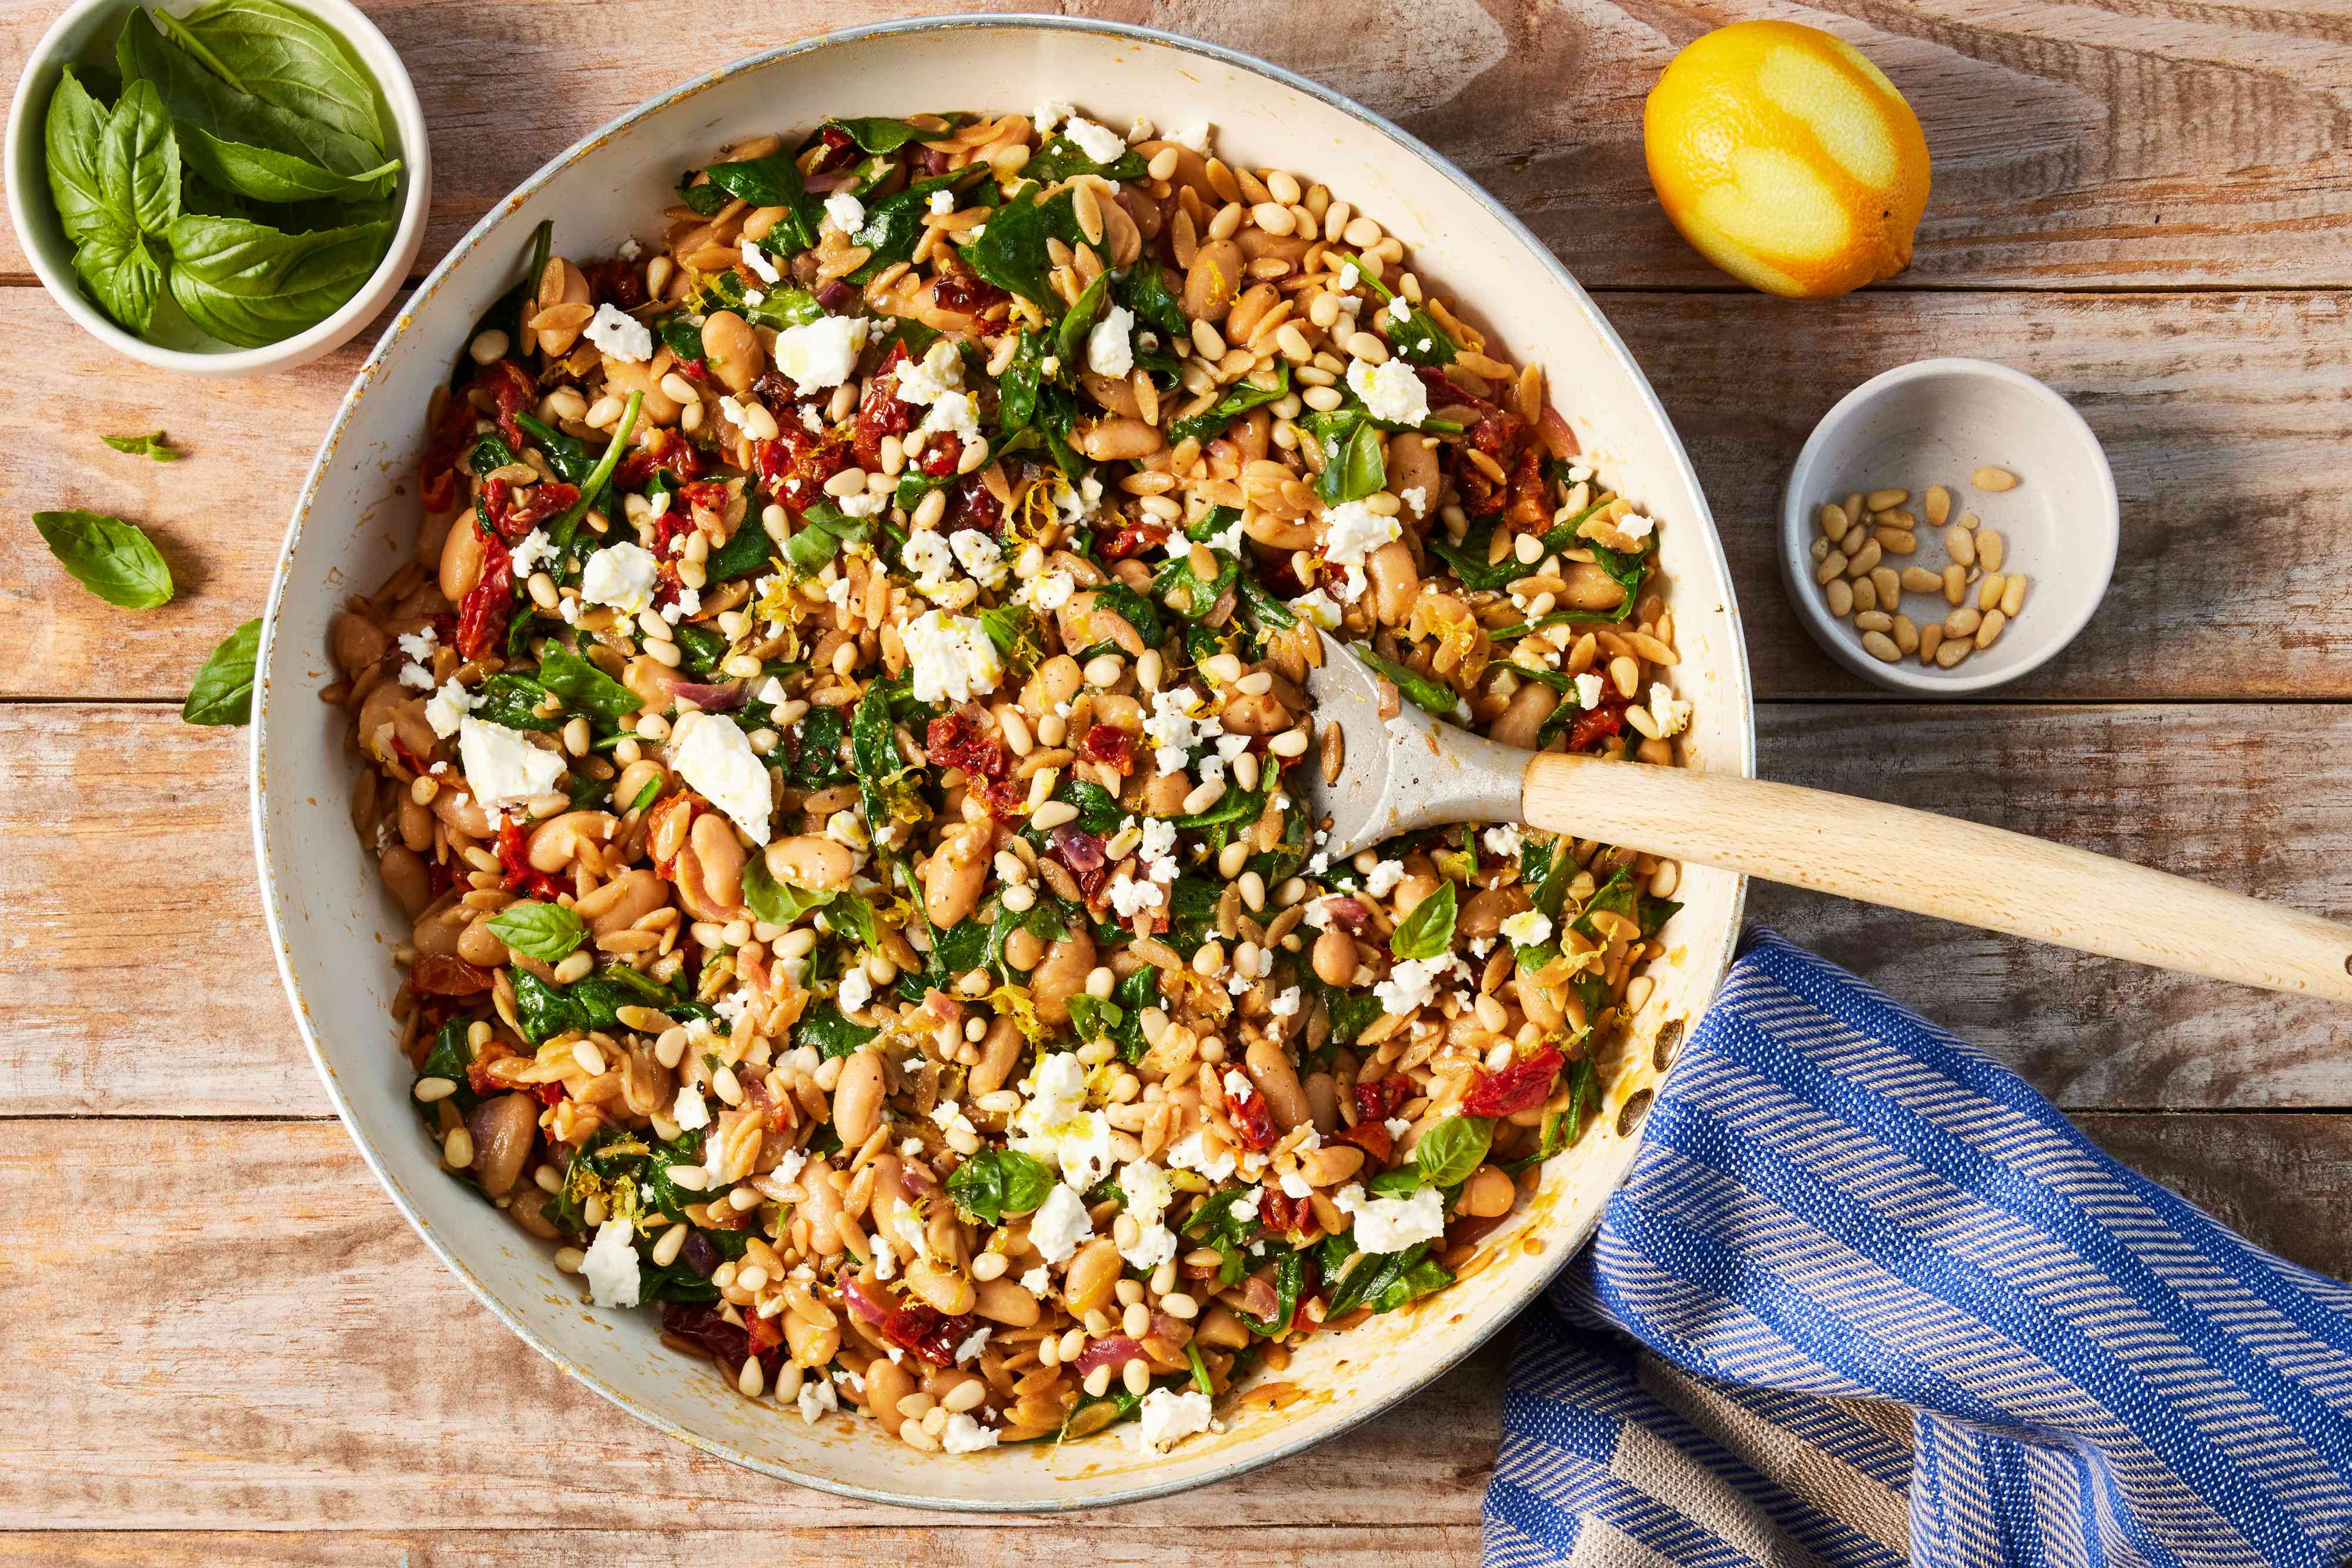 15 High-Protein, Vegetarian Dinners For Better Blood Sugar